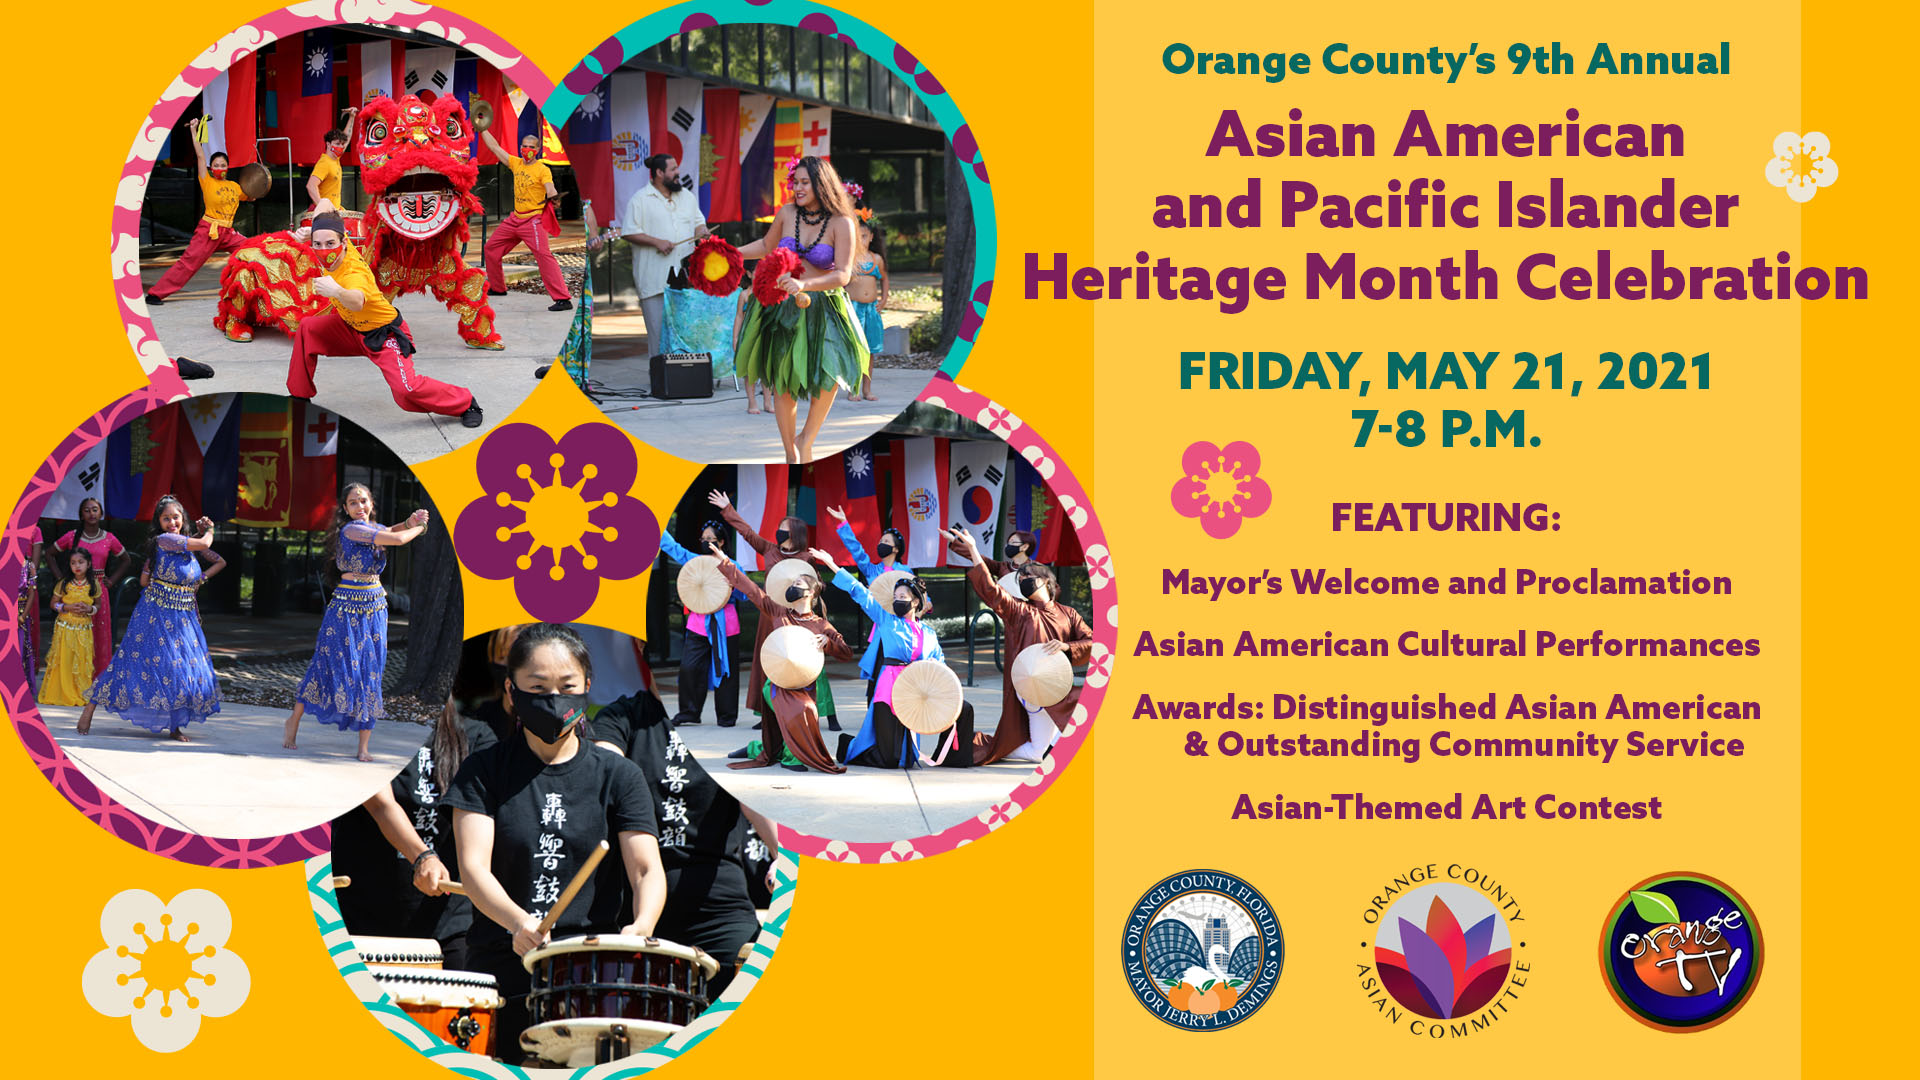 Orange County's 9th Annual ASIAN PACIFIC AMERICAN HERITAGE MONTH CELEBRATION